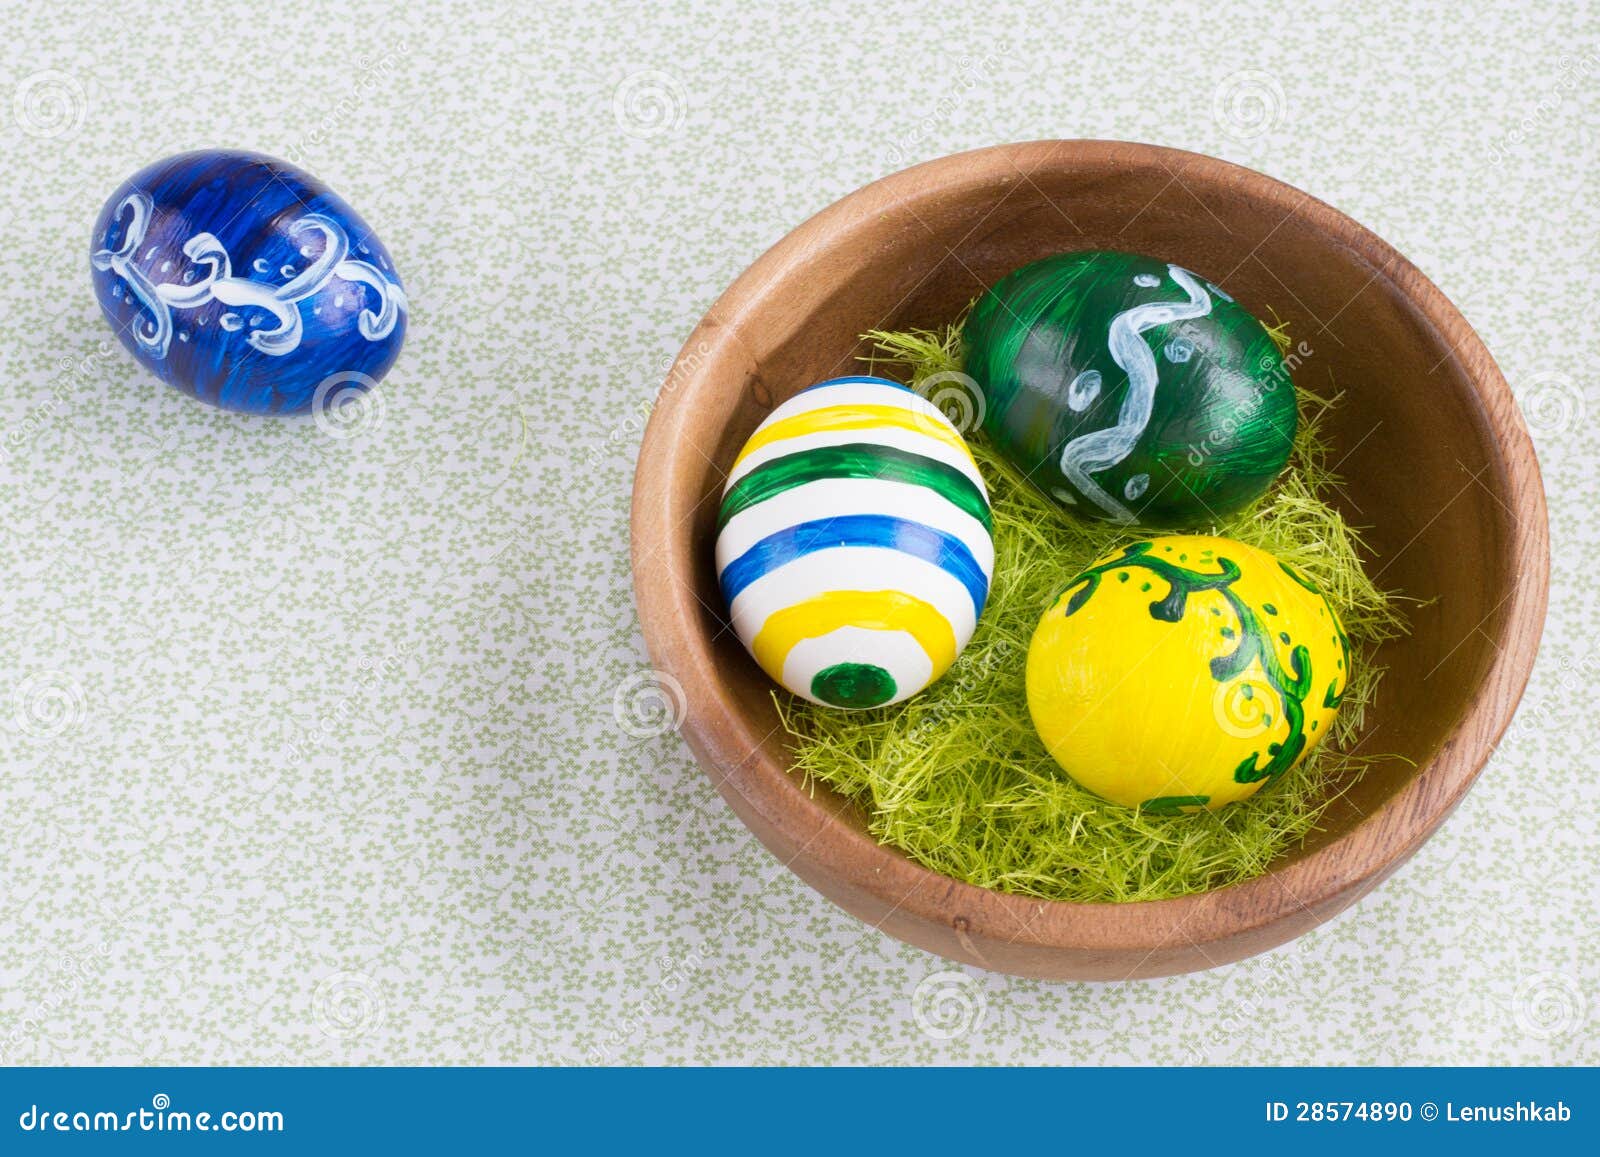 Colorful Easter eggs stock photo. Image of ideas, bowl - 28574890